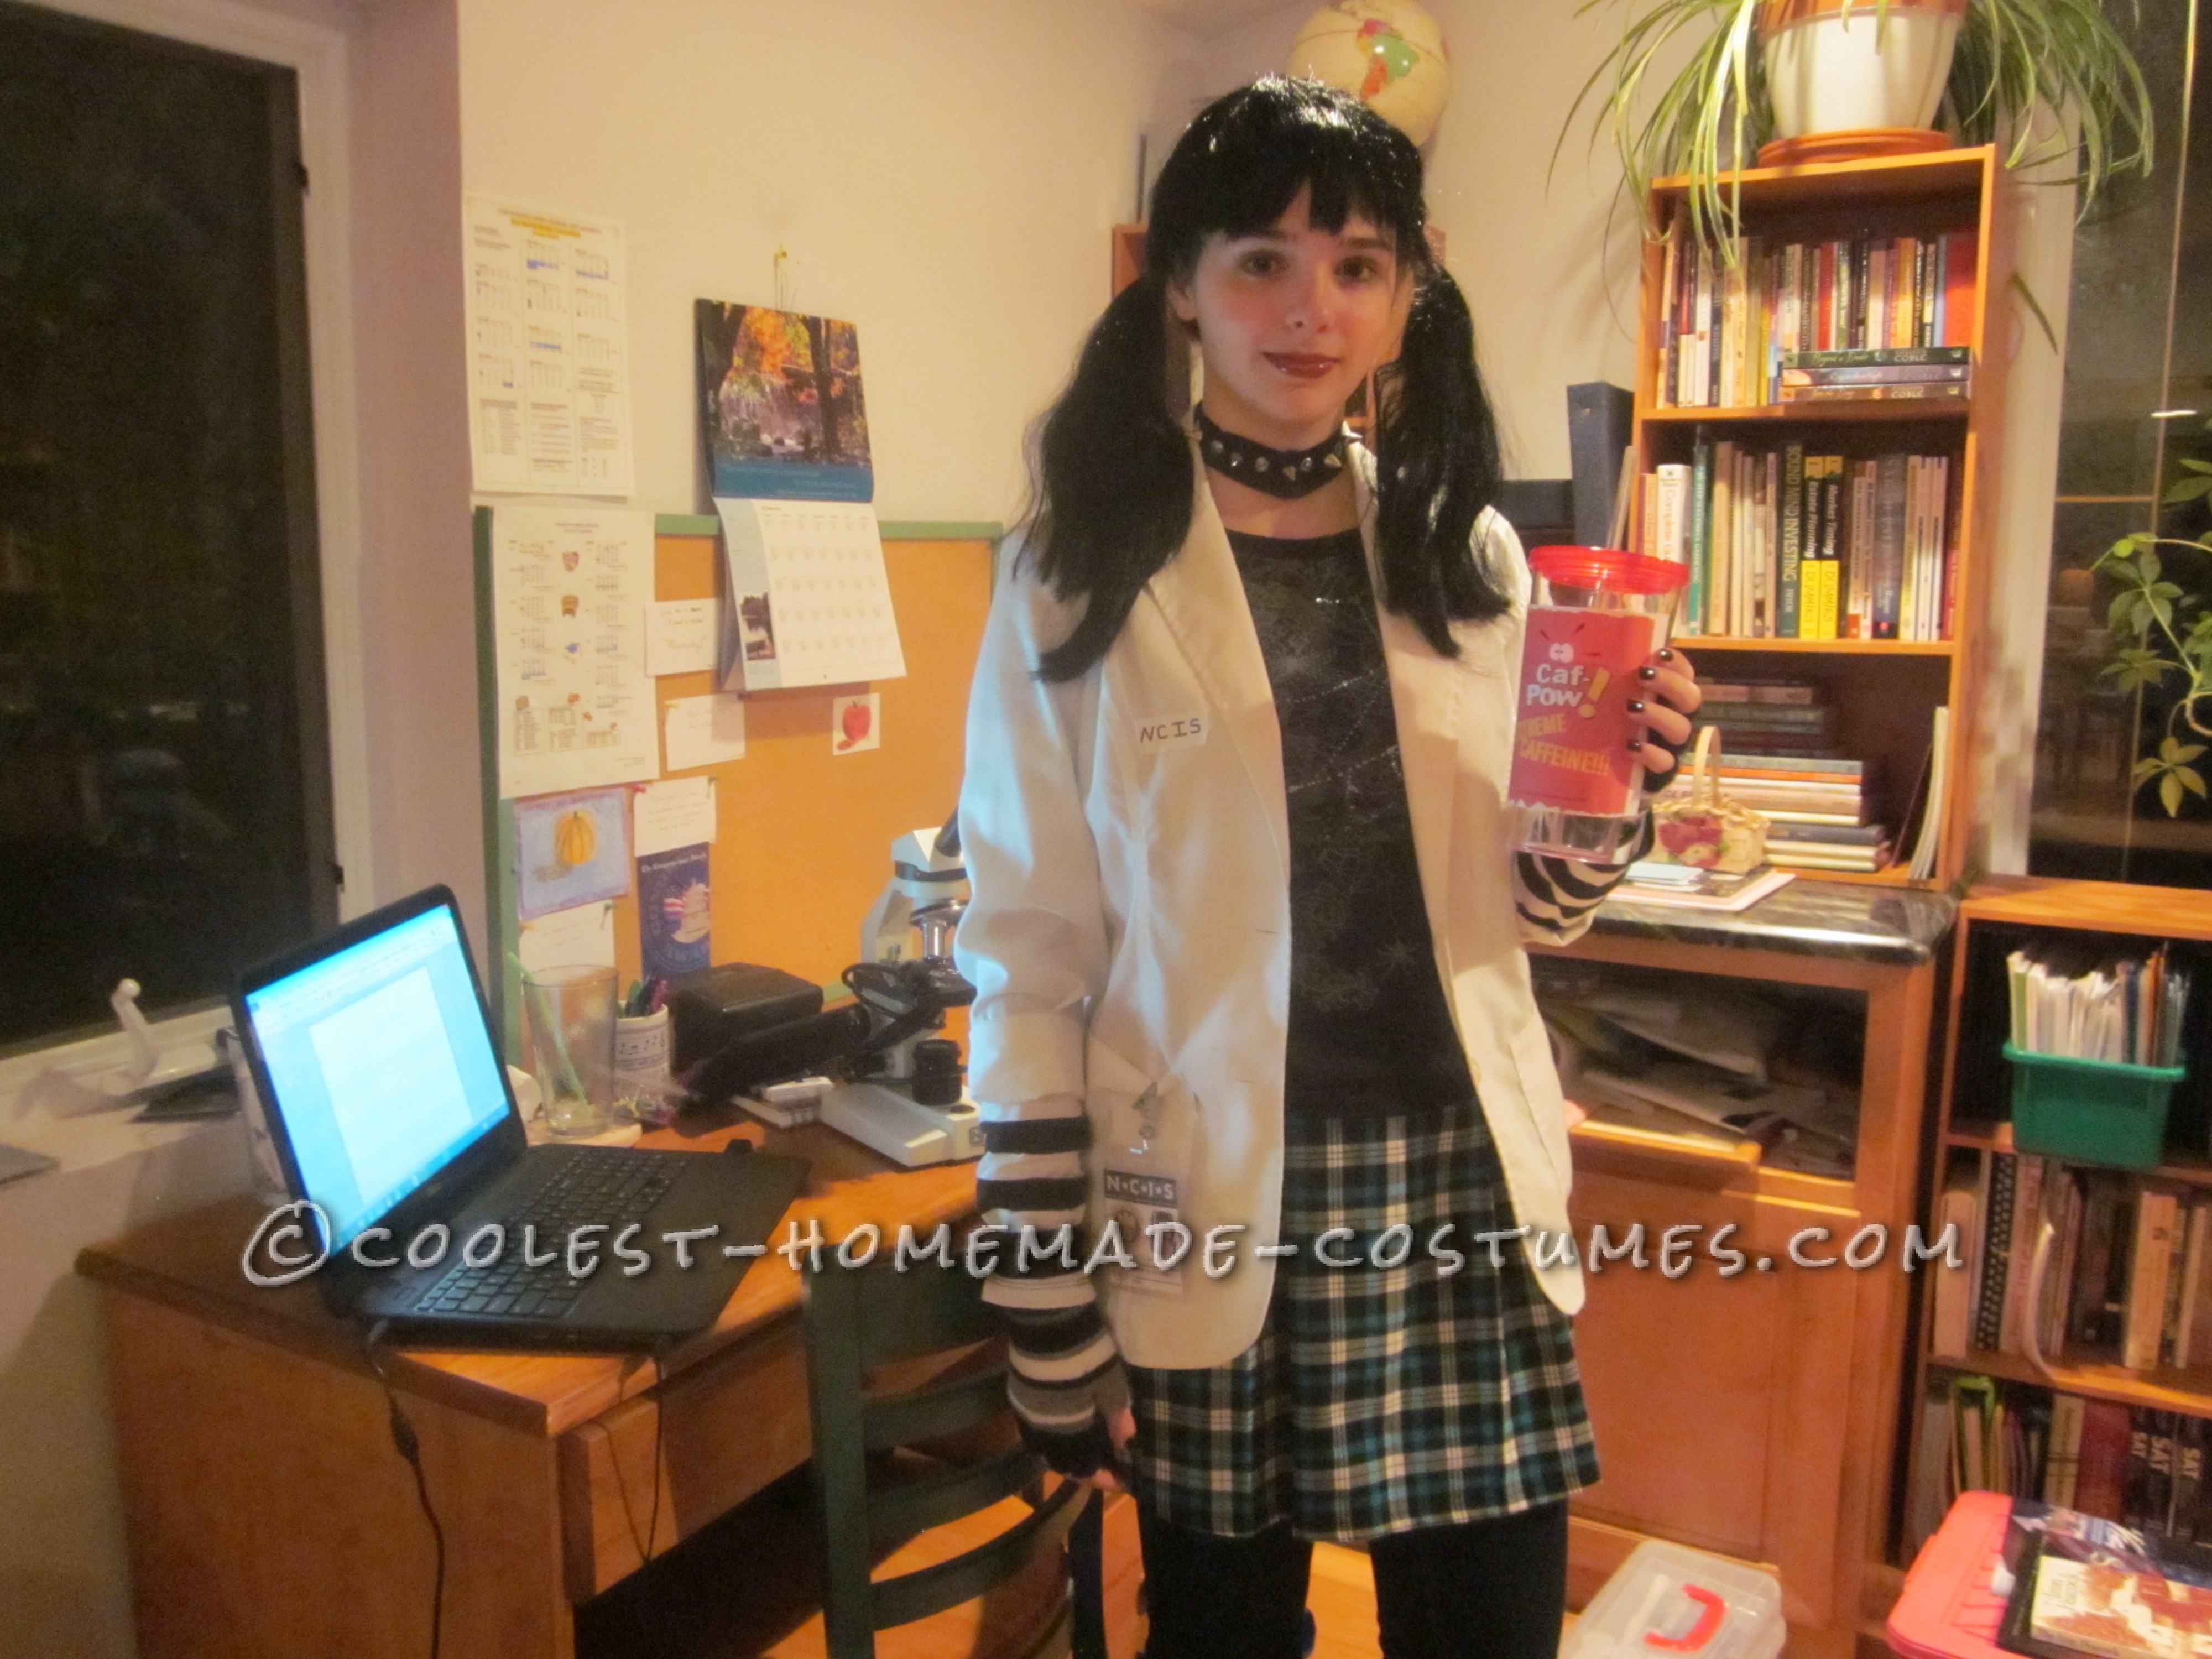 Goth Forensic Chic Costume: Abby Sciuto from NCIS